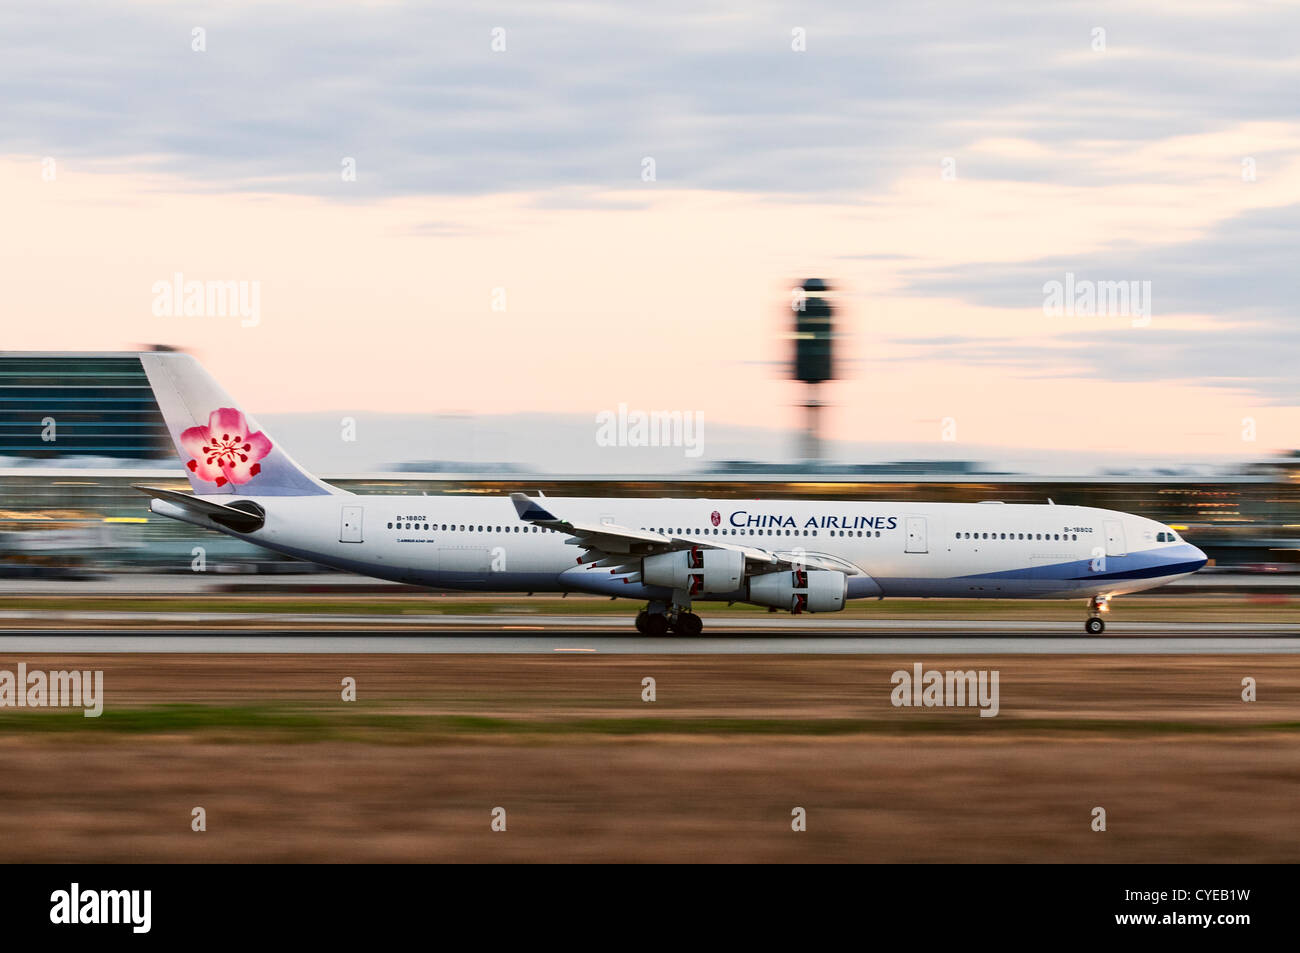 China Airlines Airbus A340-300 (B-18802) airliner blurred by camera panning at slow shutter speed with the landing aircraft. Stock Photo